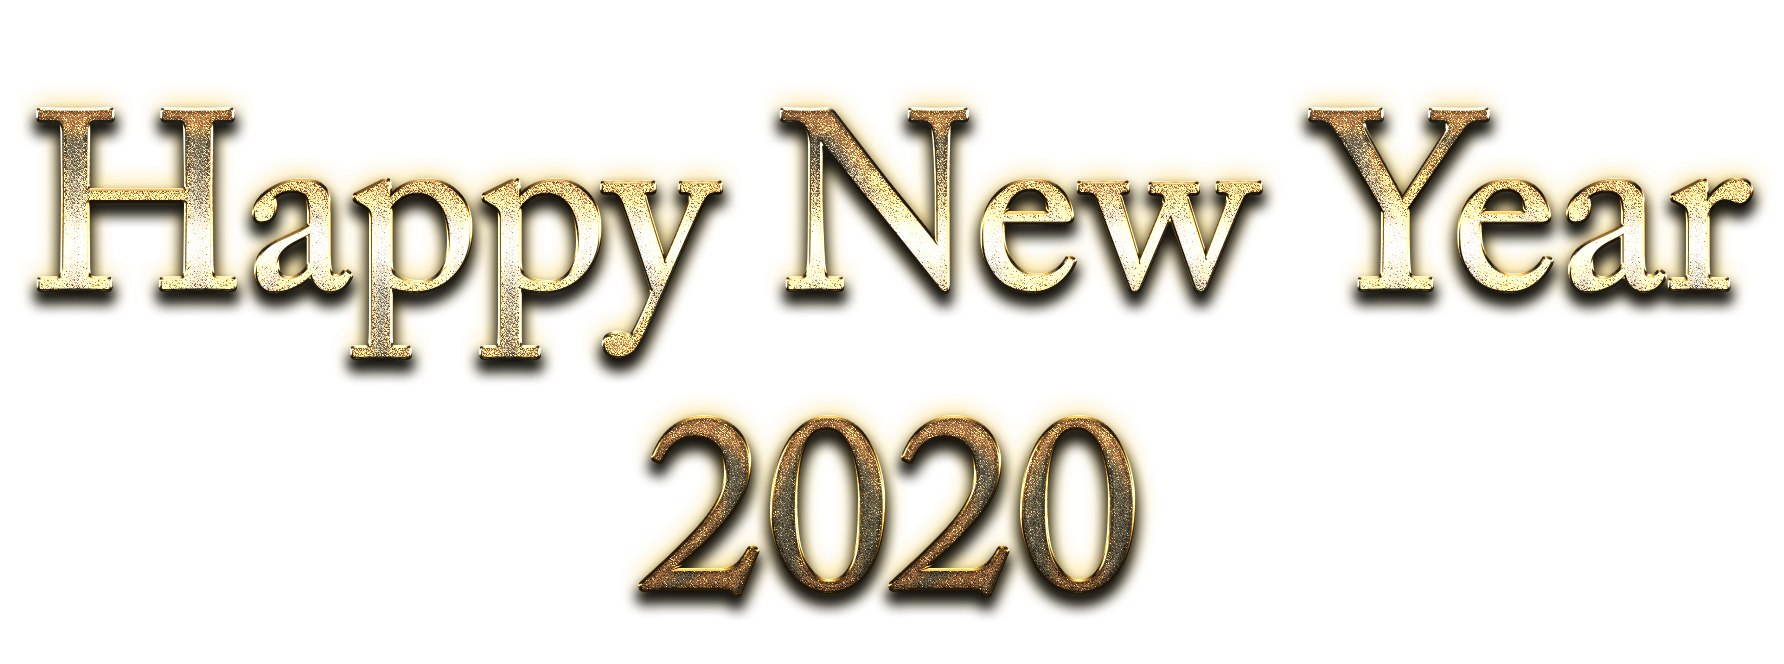 Happy New Year 2020 PNG Transparent Image